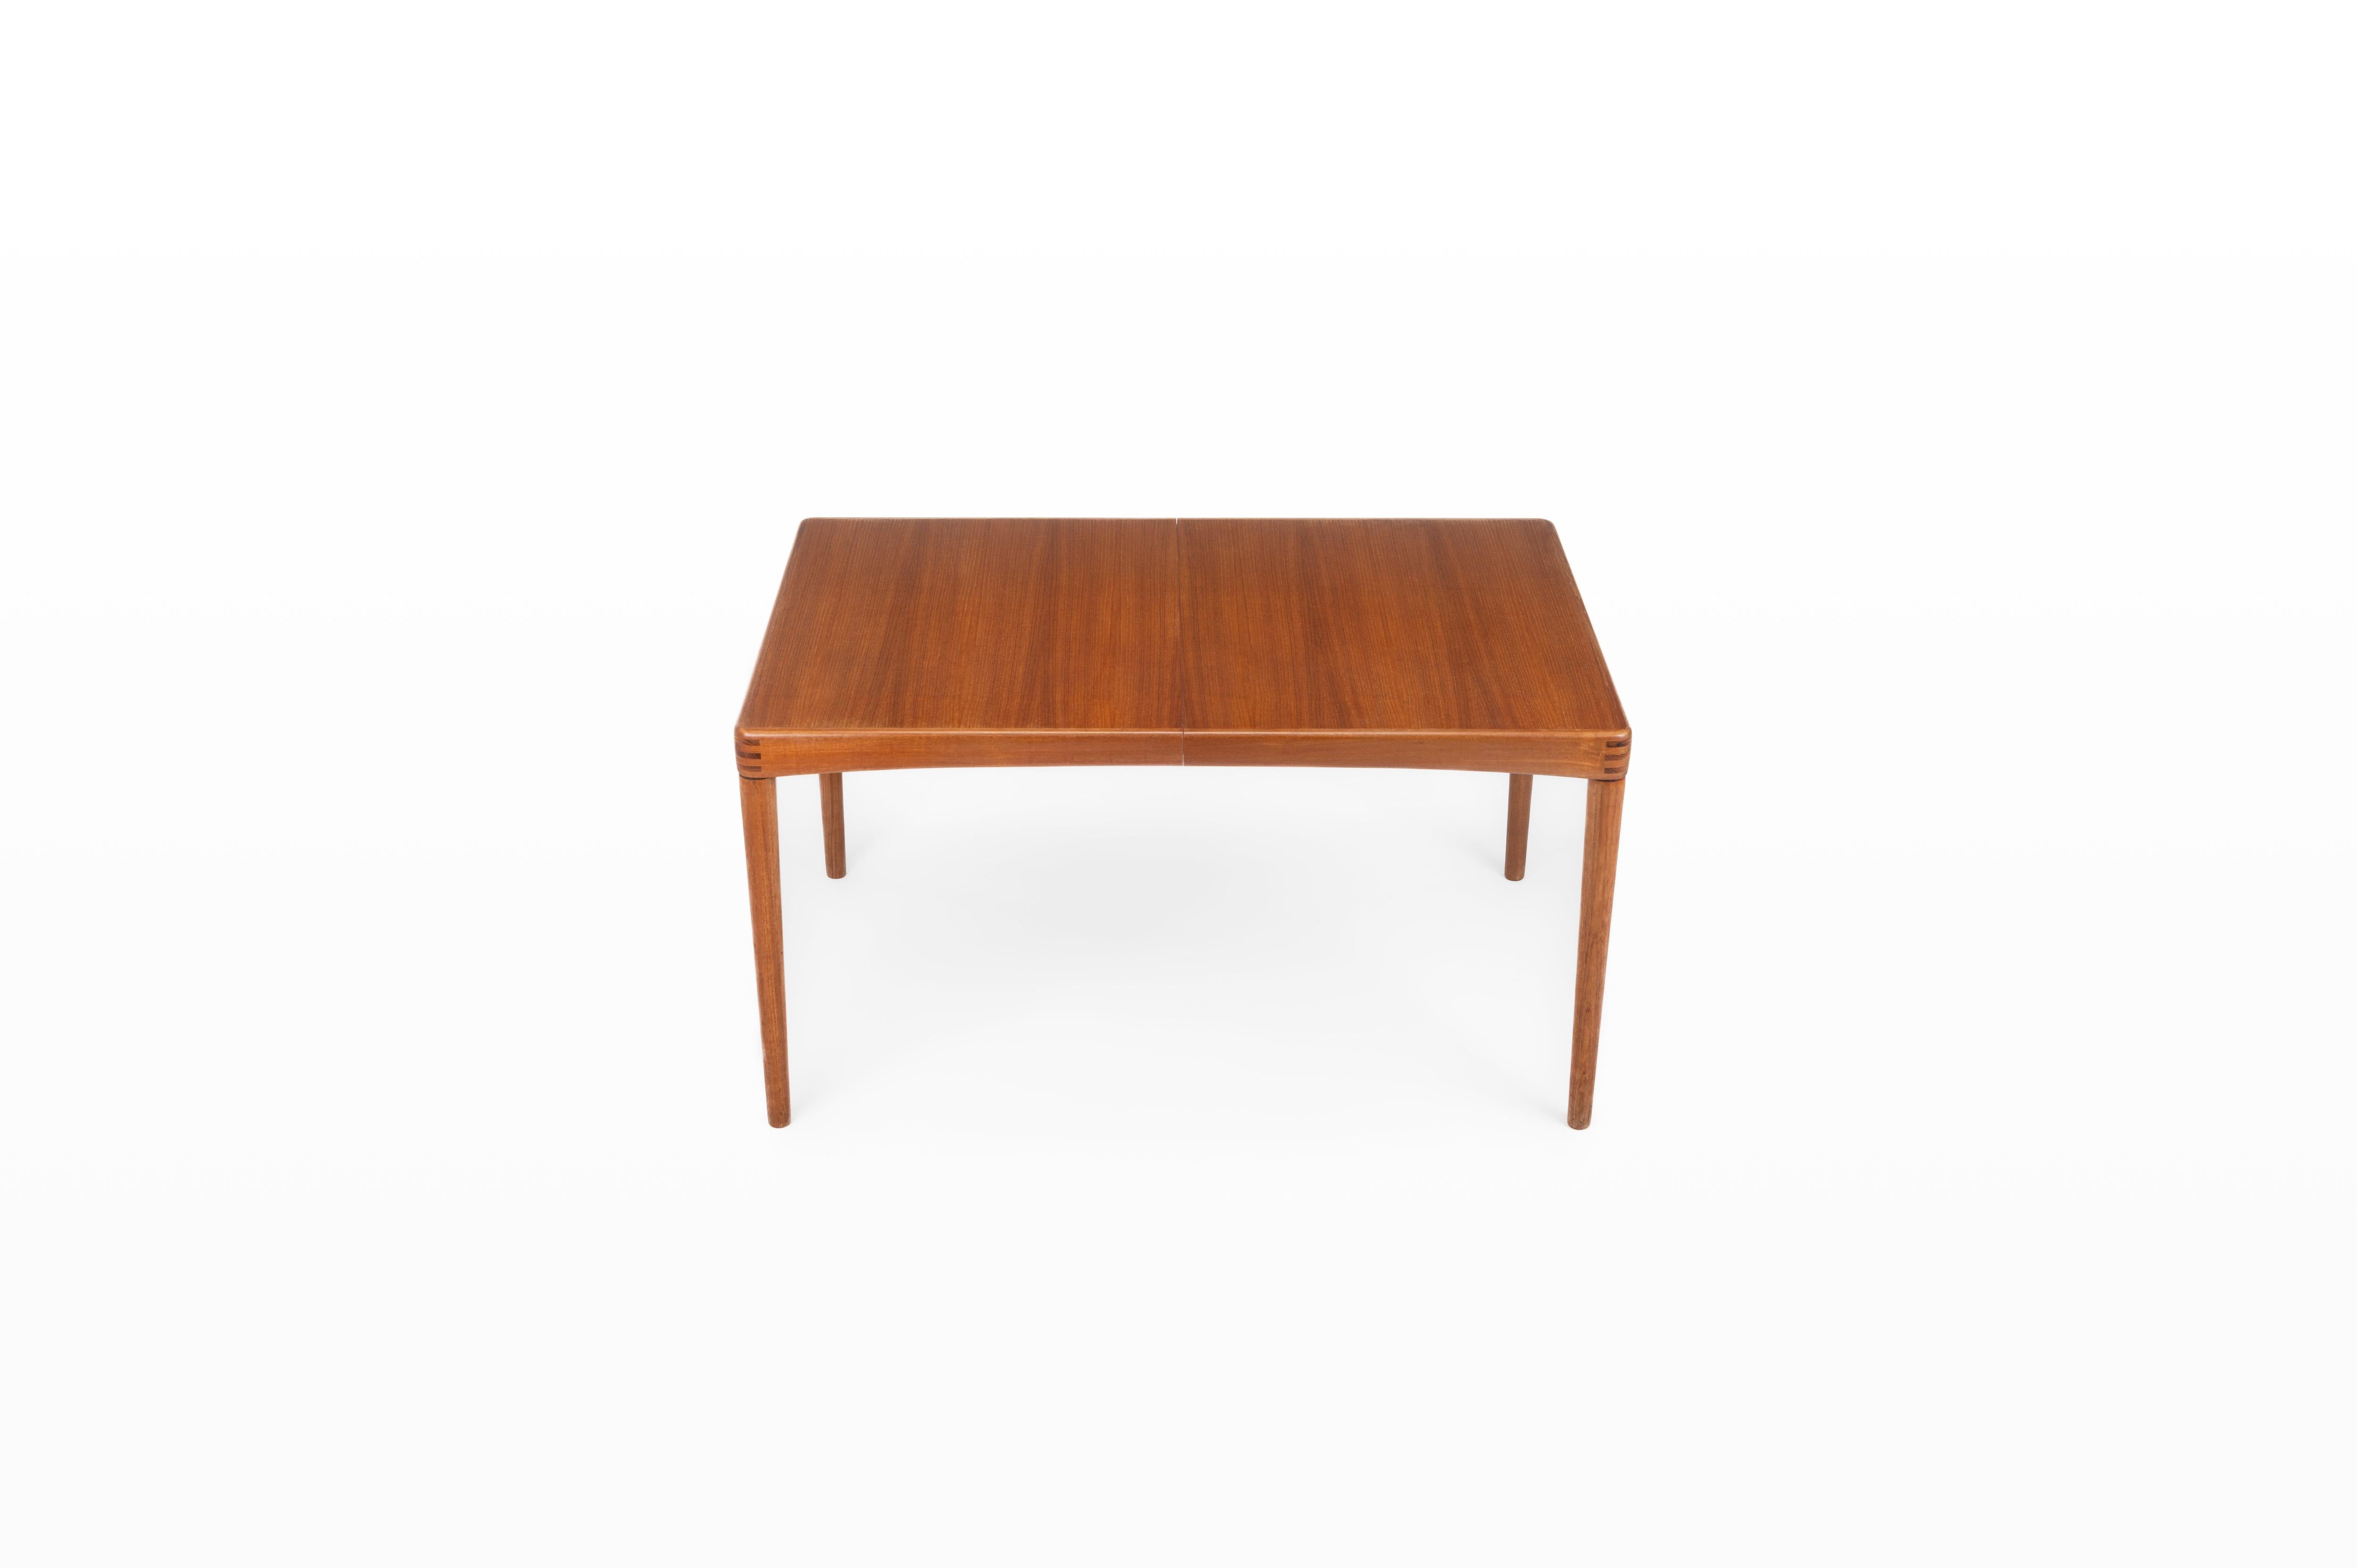 Beautiful rectangular dining table produced by Bramin, Denmark 1960s. This table is made of teak and can be extended. The table is in very good condition and marked by the producer.

Dimensions:
W: 135 - 195 cm
D: 90 cm
H: 72 cm